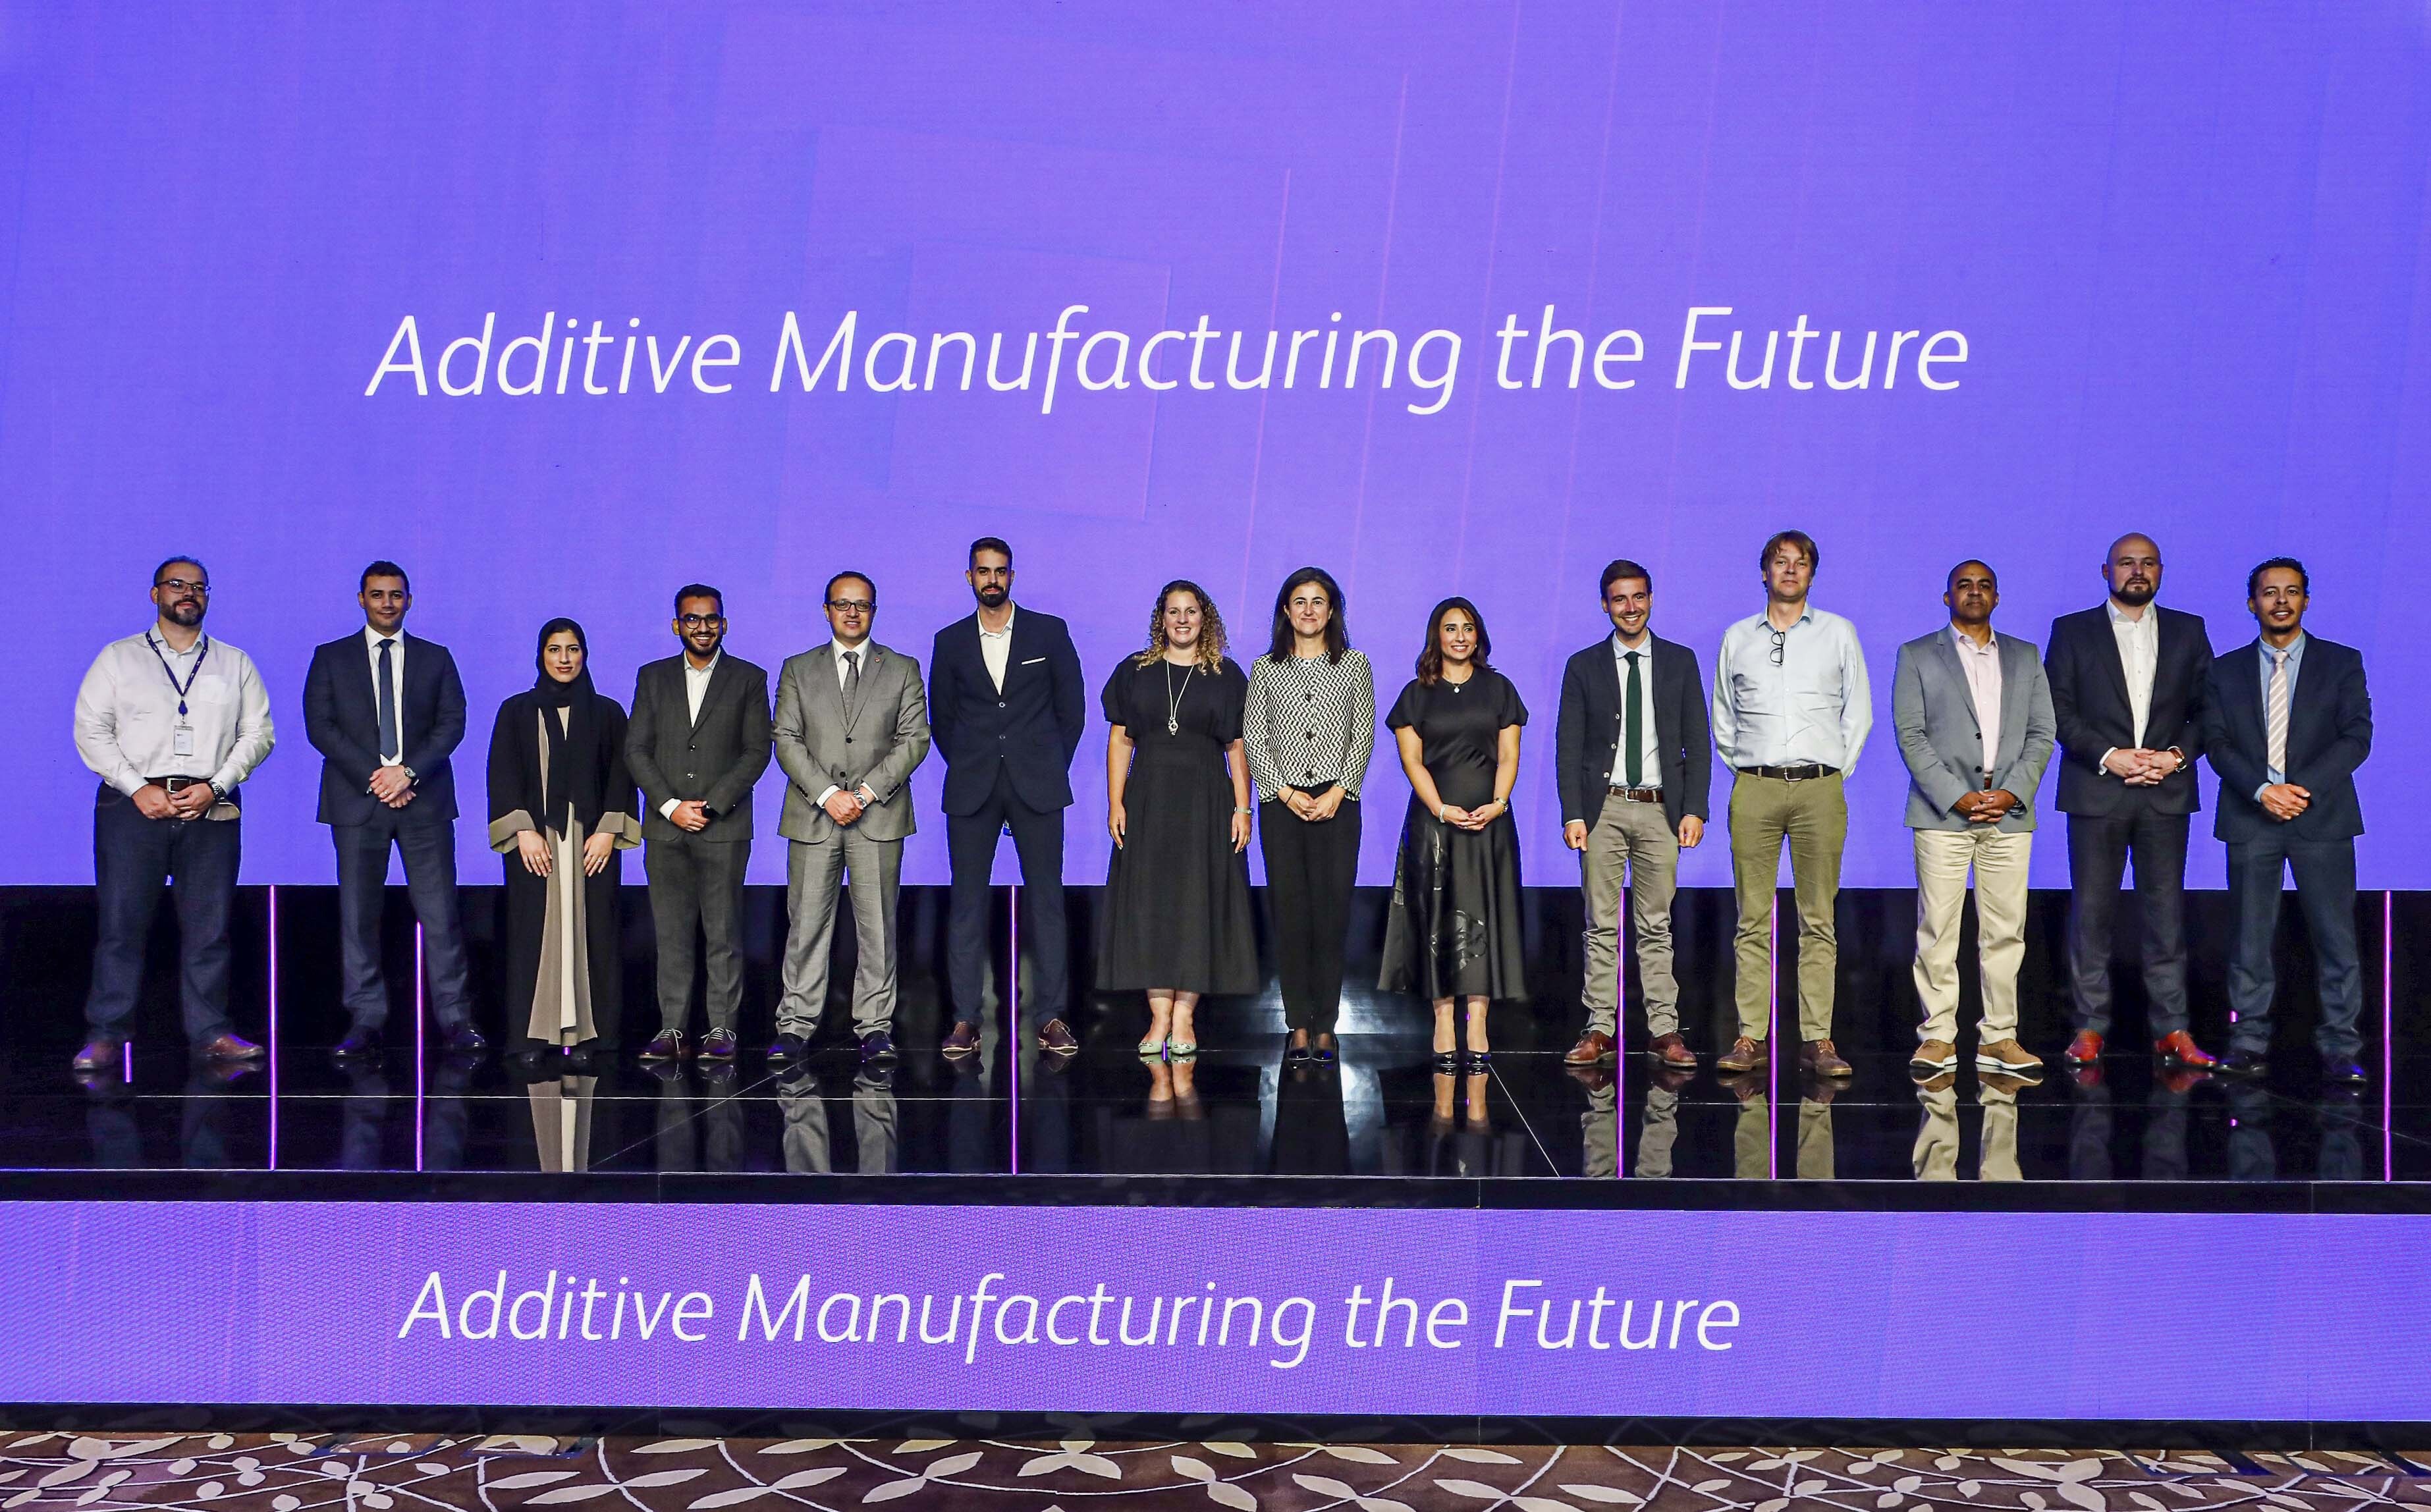 Technology Innovation Institute To Host 2nd ‘Additive Manufacturing The Future’ Seminar In Abu Dhabi